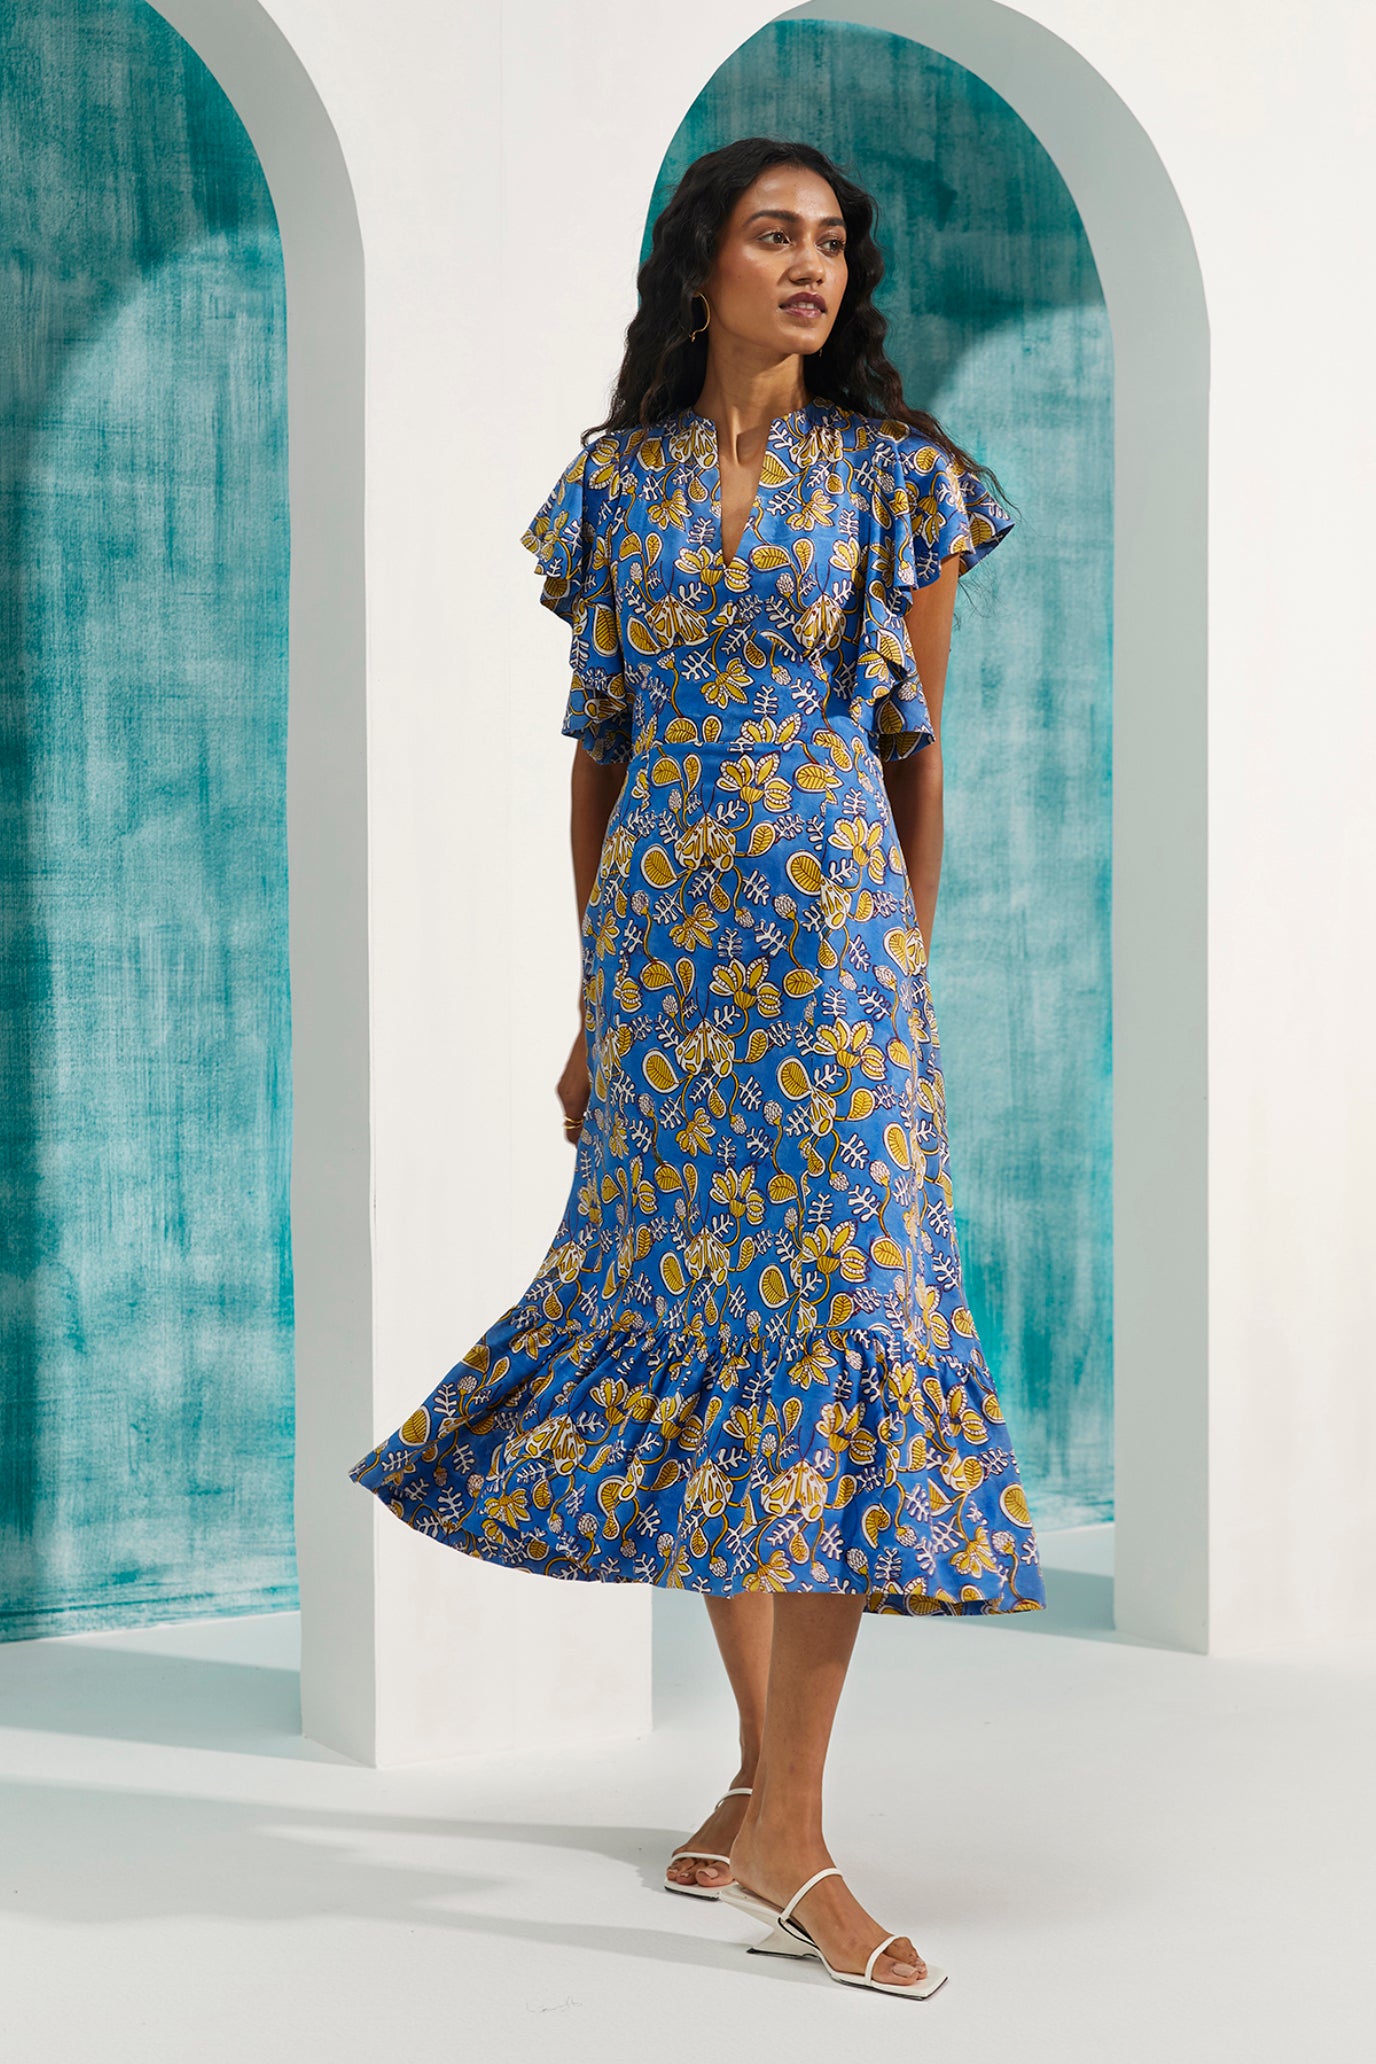 sustainable-handmade-handcrafted-jodi-thejodilife-block-printed-blue-yellow-floral-flouncy-sleeves-tiered-hemline